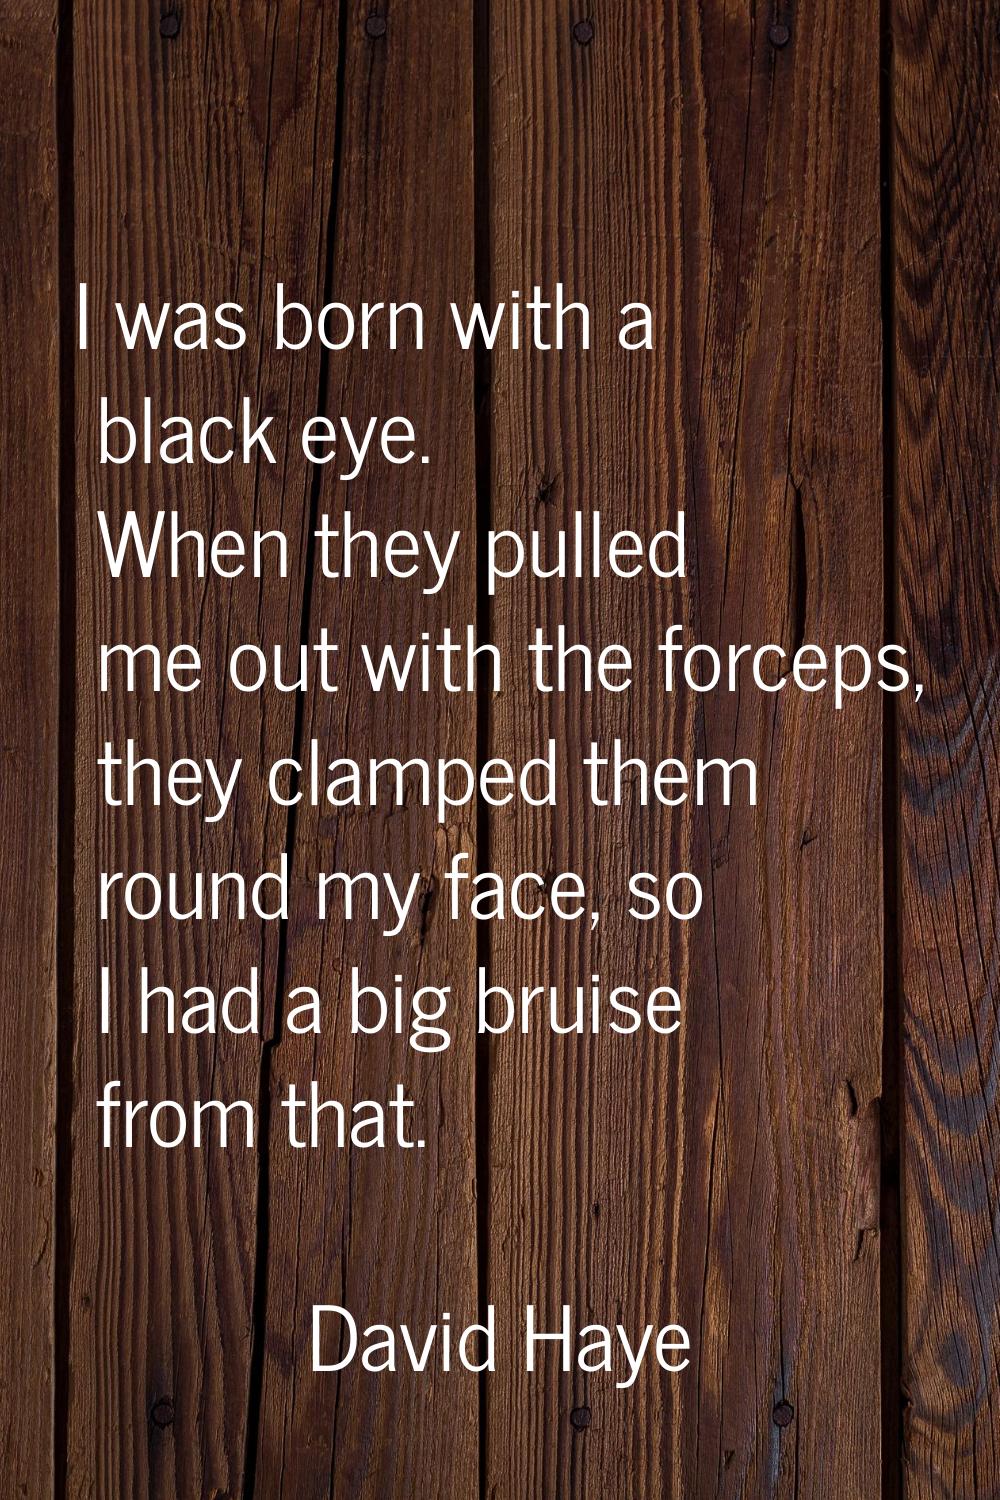 I was born with a black eye. When they pulled me out with the forceps, they clamped them round my f